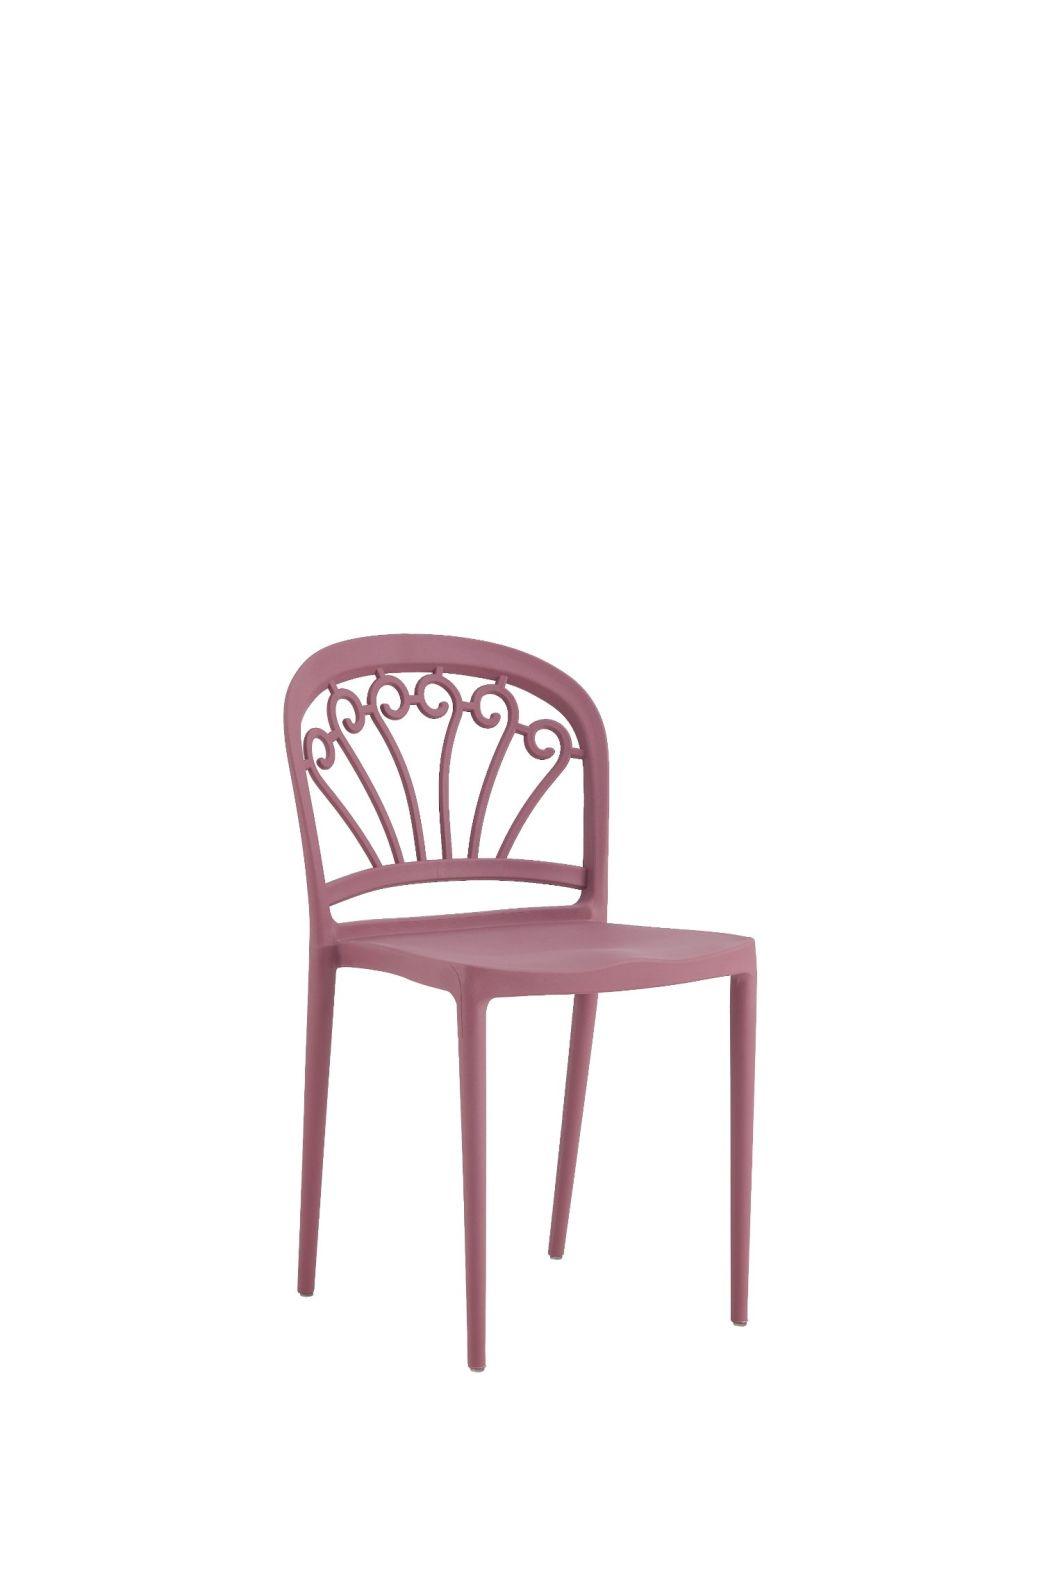 Factory Price Home Furniture Dining Restaurant Cafe Plastic Chair